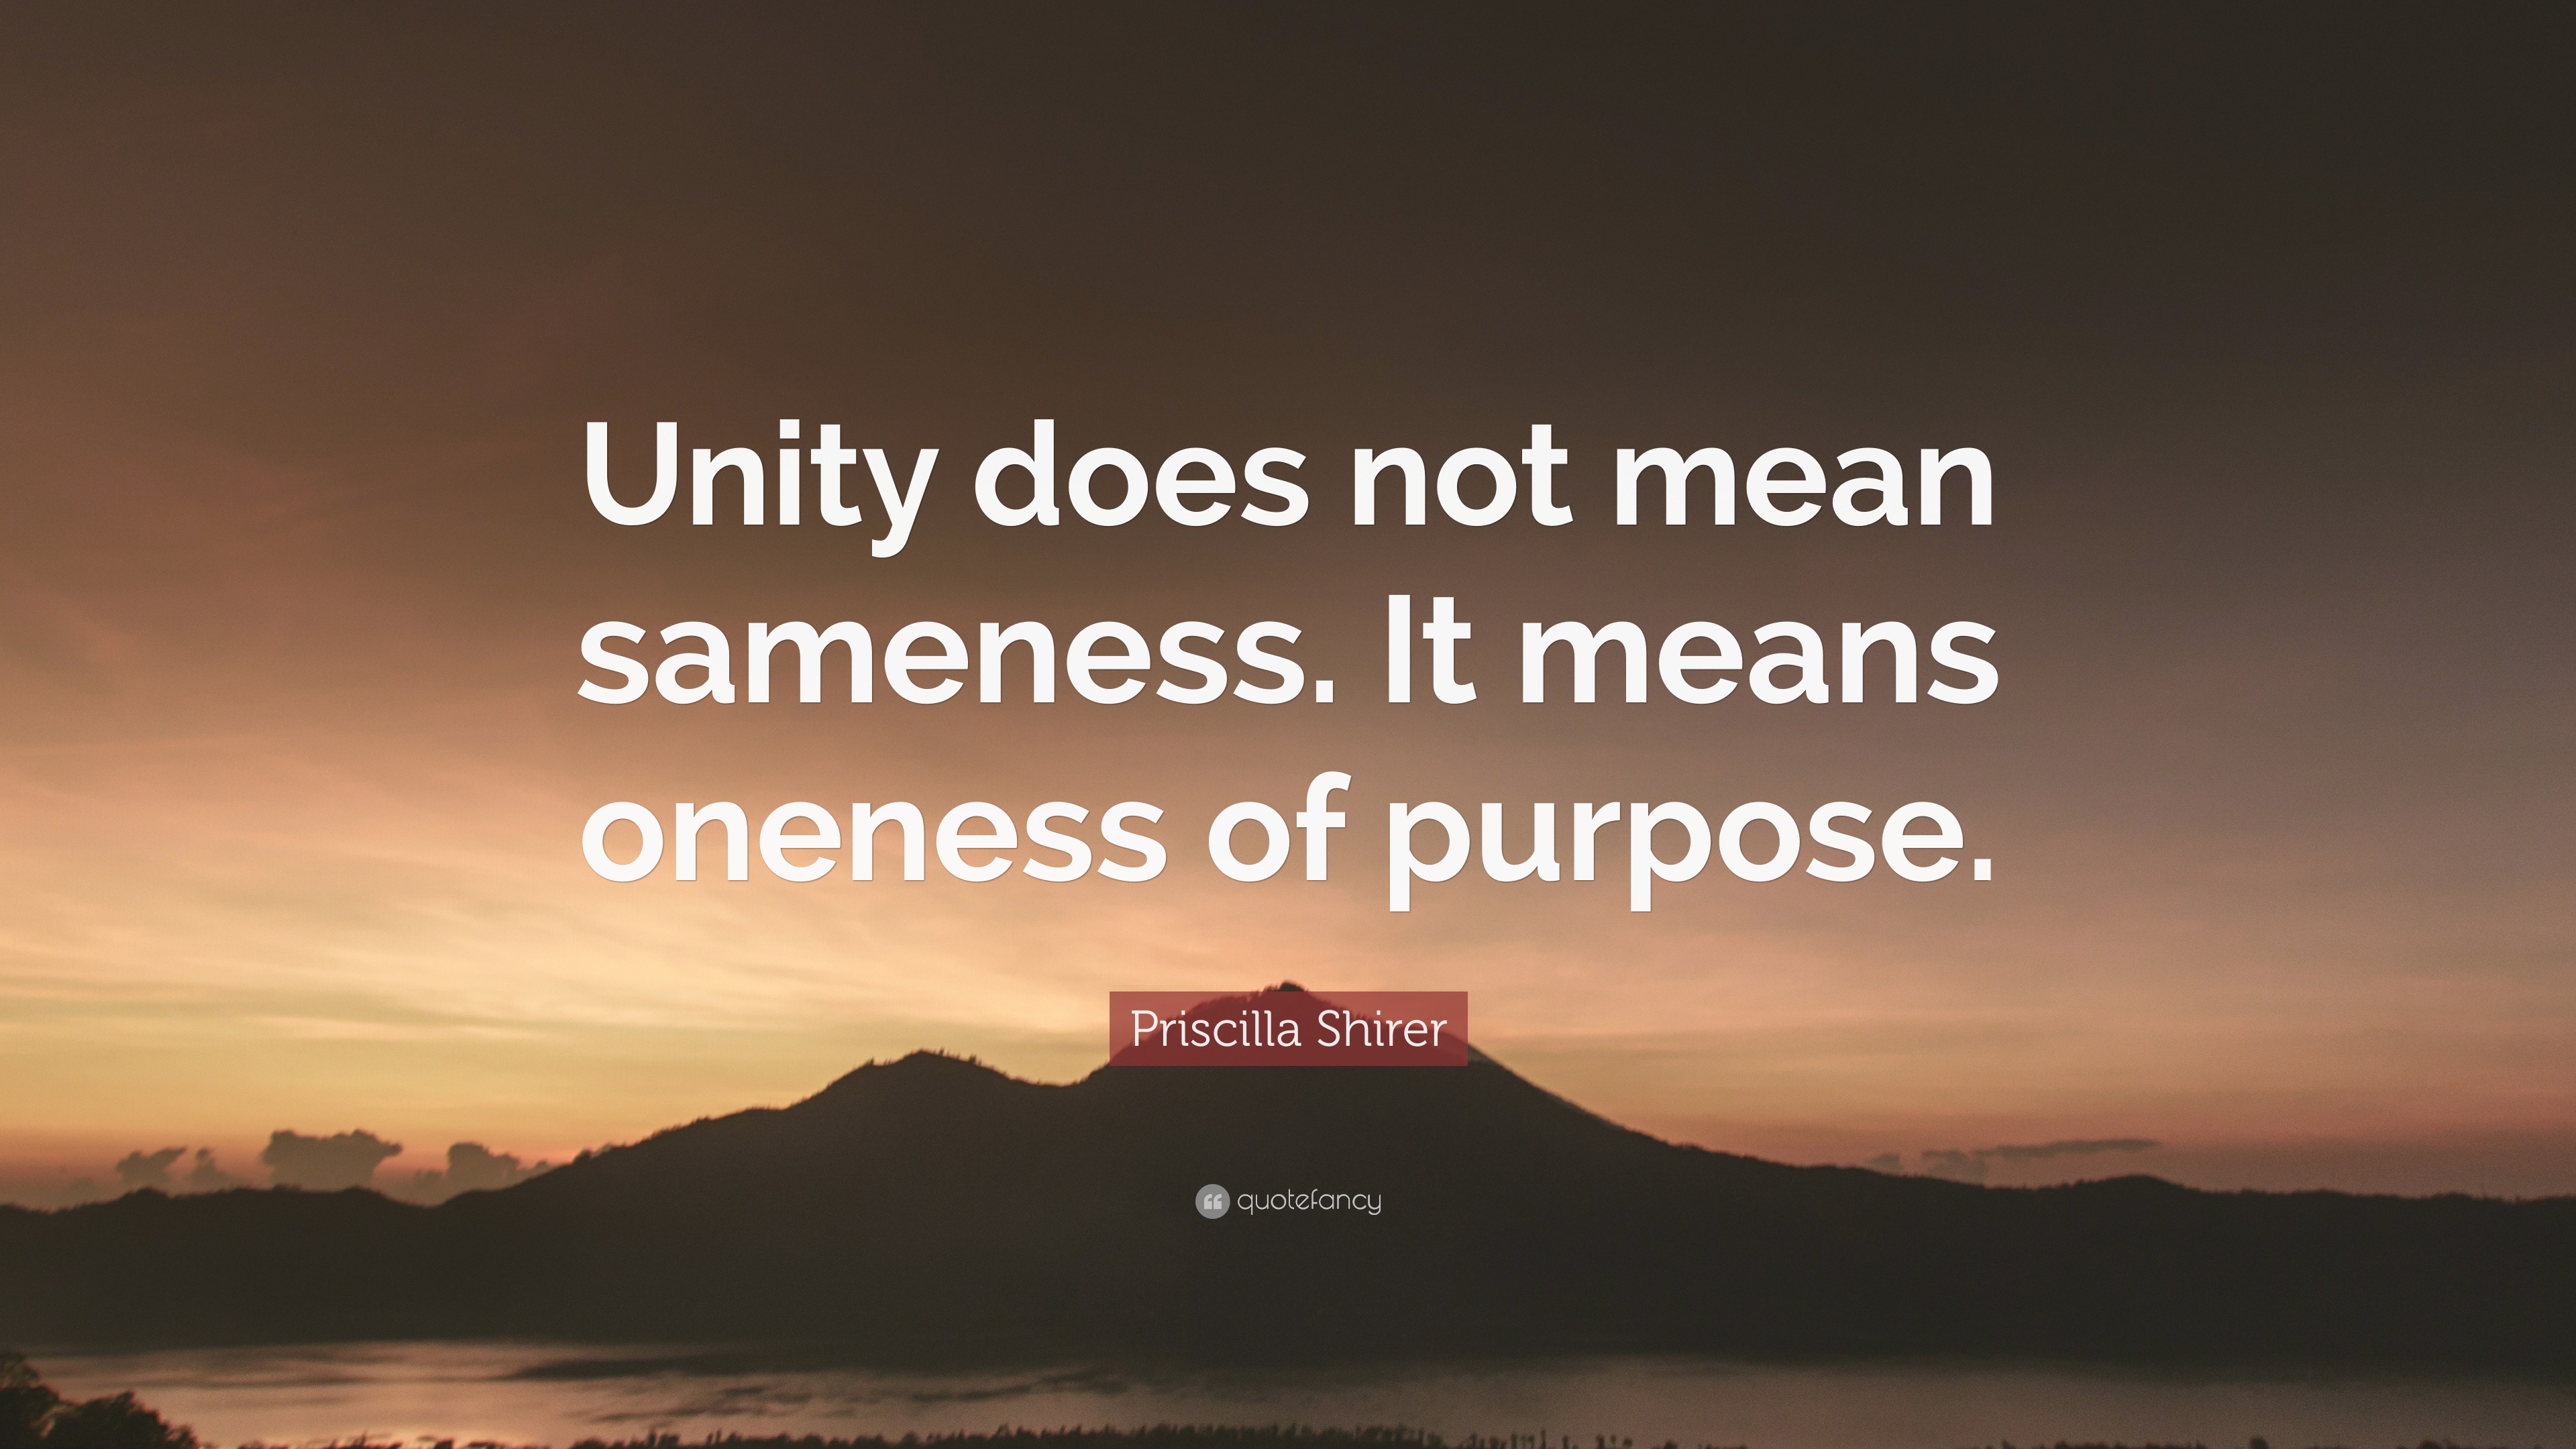 Priscilla Shirer Quote: “Unity does not mean sameness. It means oneness